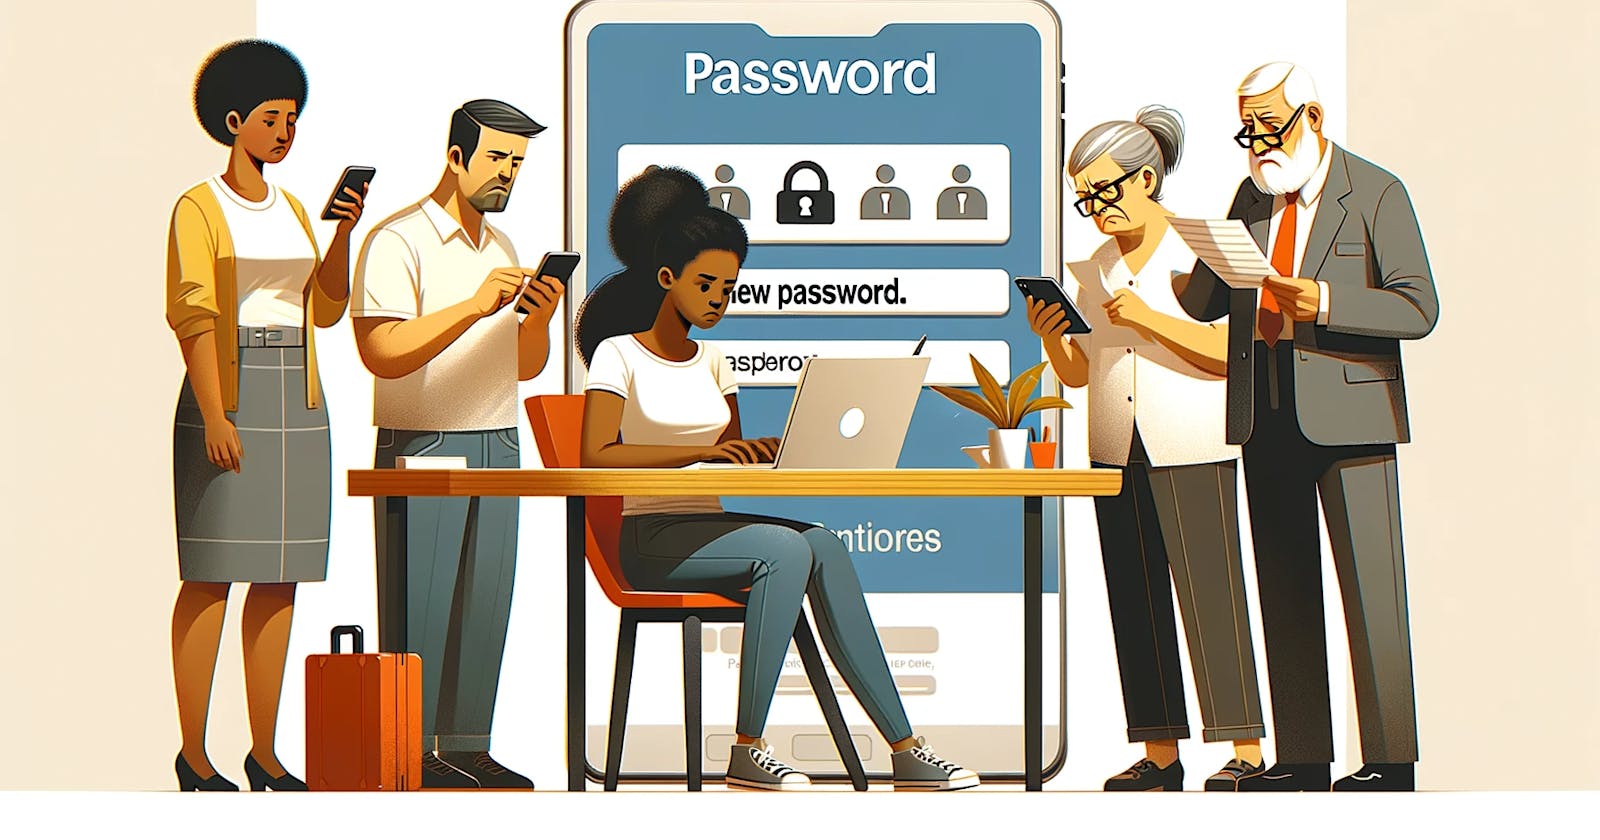 [Secure 101] Is It Really Safe to Change Passwords Every 90 Days or Regularly?